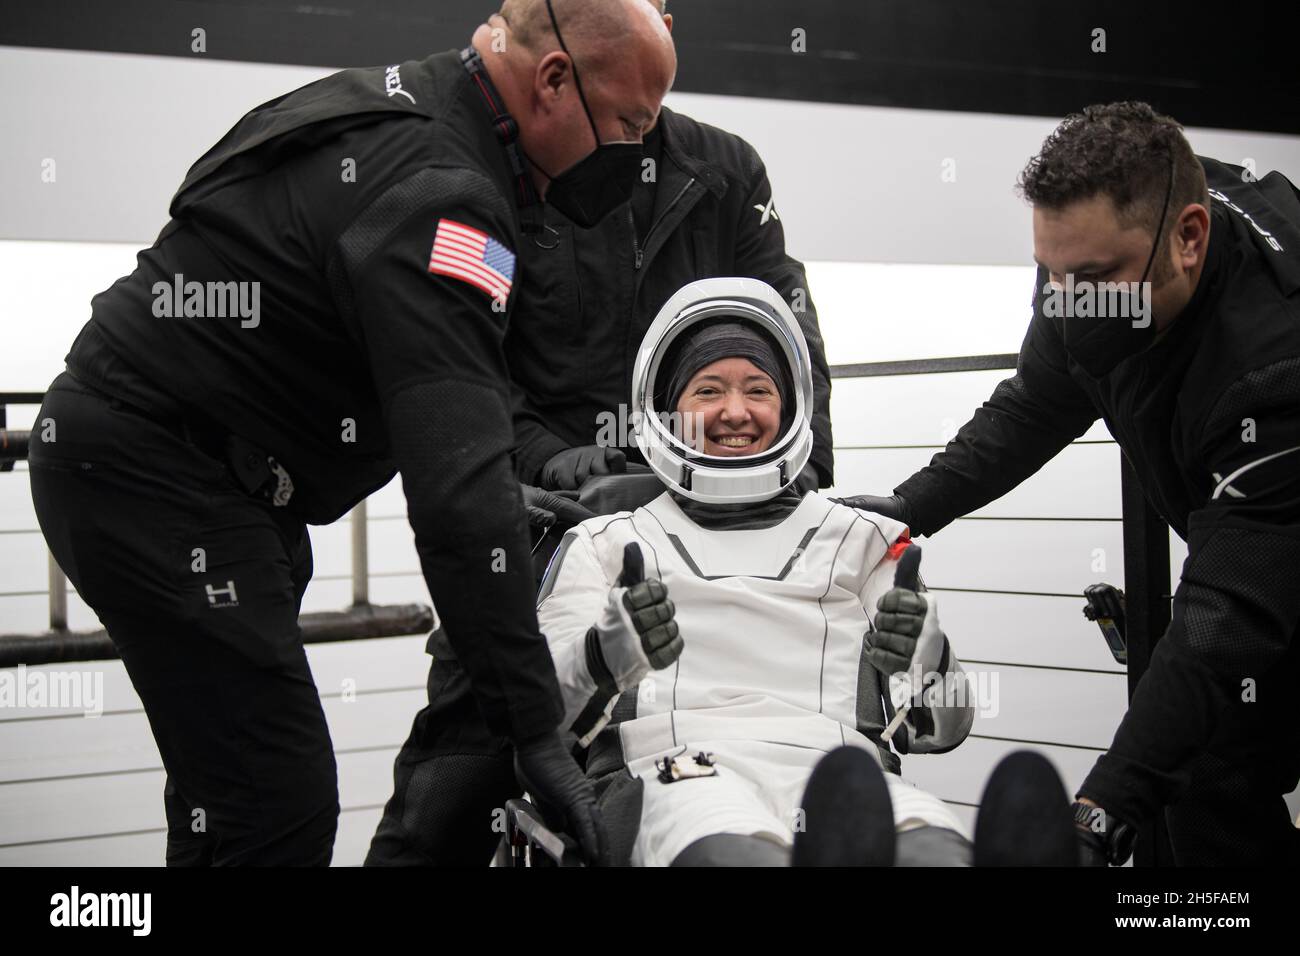 Pensecola, United States Of America. 08th Nov, 2021. Pensecola, United States of America. 08 November, 2021. NASA astronaut Megan McArthur, is helped out of the SpaceX Crew Dragon Endeavour spacecraft after splashdown in the Gulf of Mexico November 8, 2021 off the coast of Pensecola, Florida. The capsule carried SpaceX Crew-2 NASA astronauts Shane Kimbrough, Megan McArthur, JAXA astronaut Aki Hoshide, and ESA astronaut Thomas Pesquet back to earth from the International Space Station. Credit: Aubrey Gemignani/NASA/Alamy Live News Stock Photo